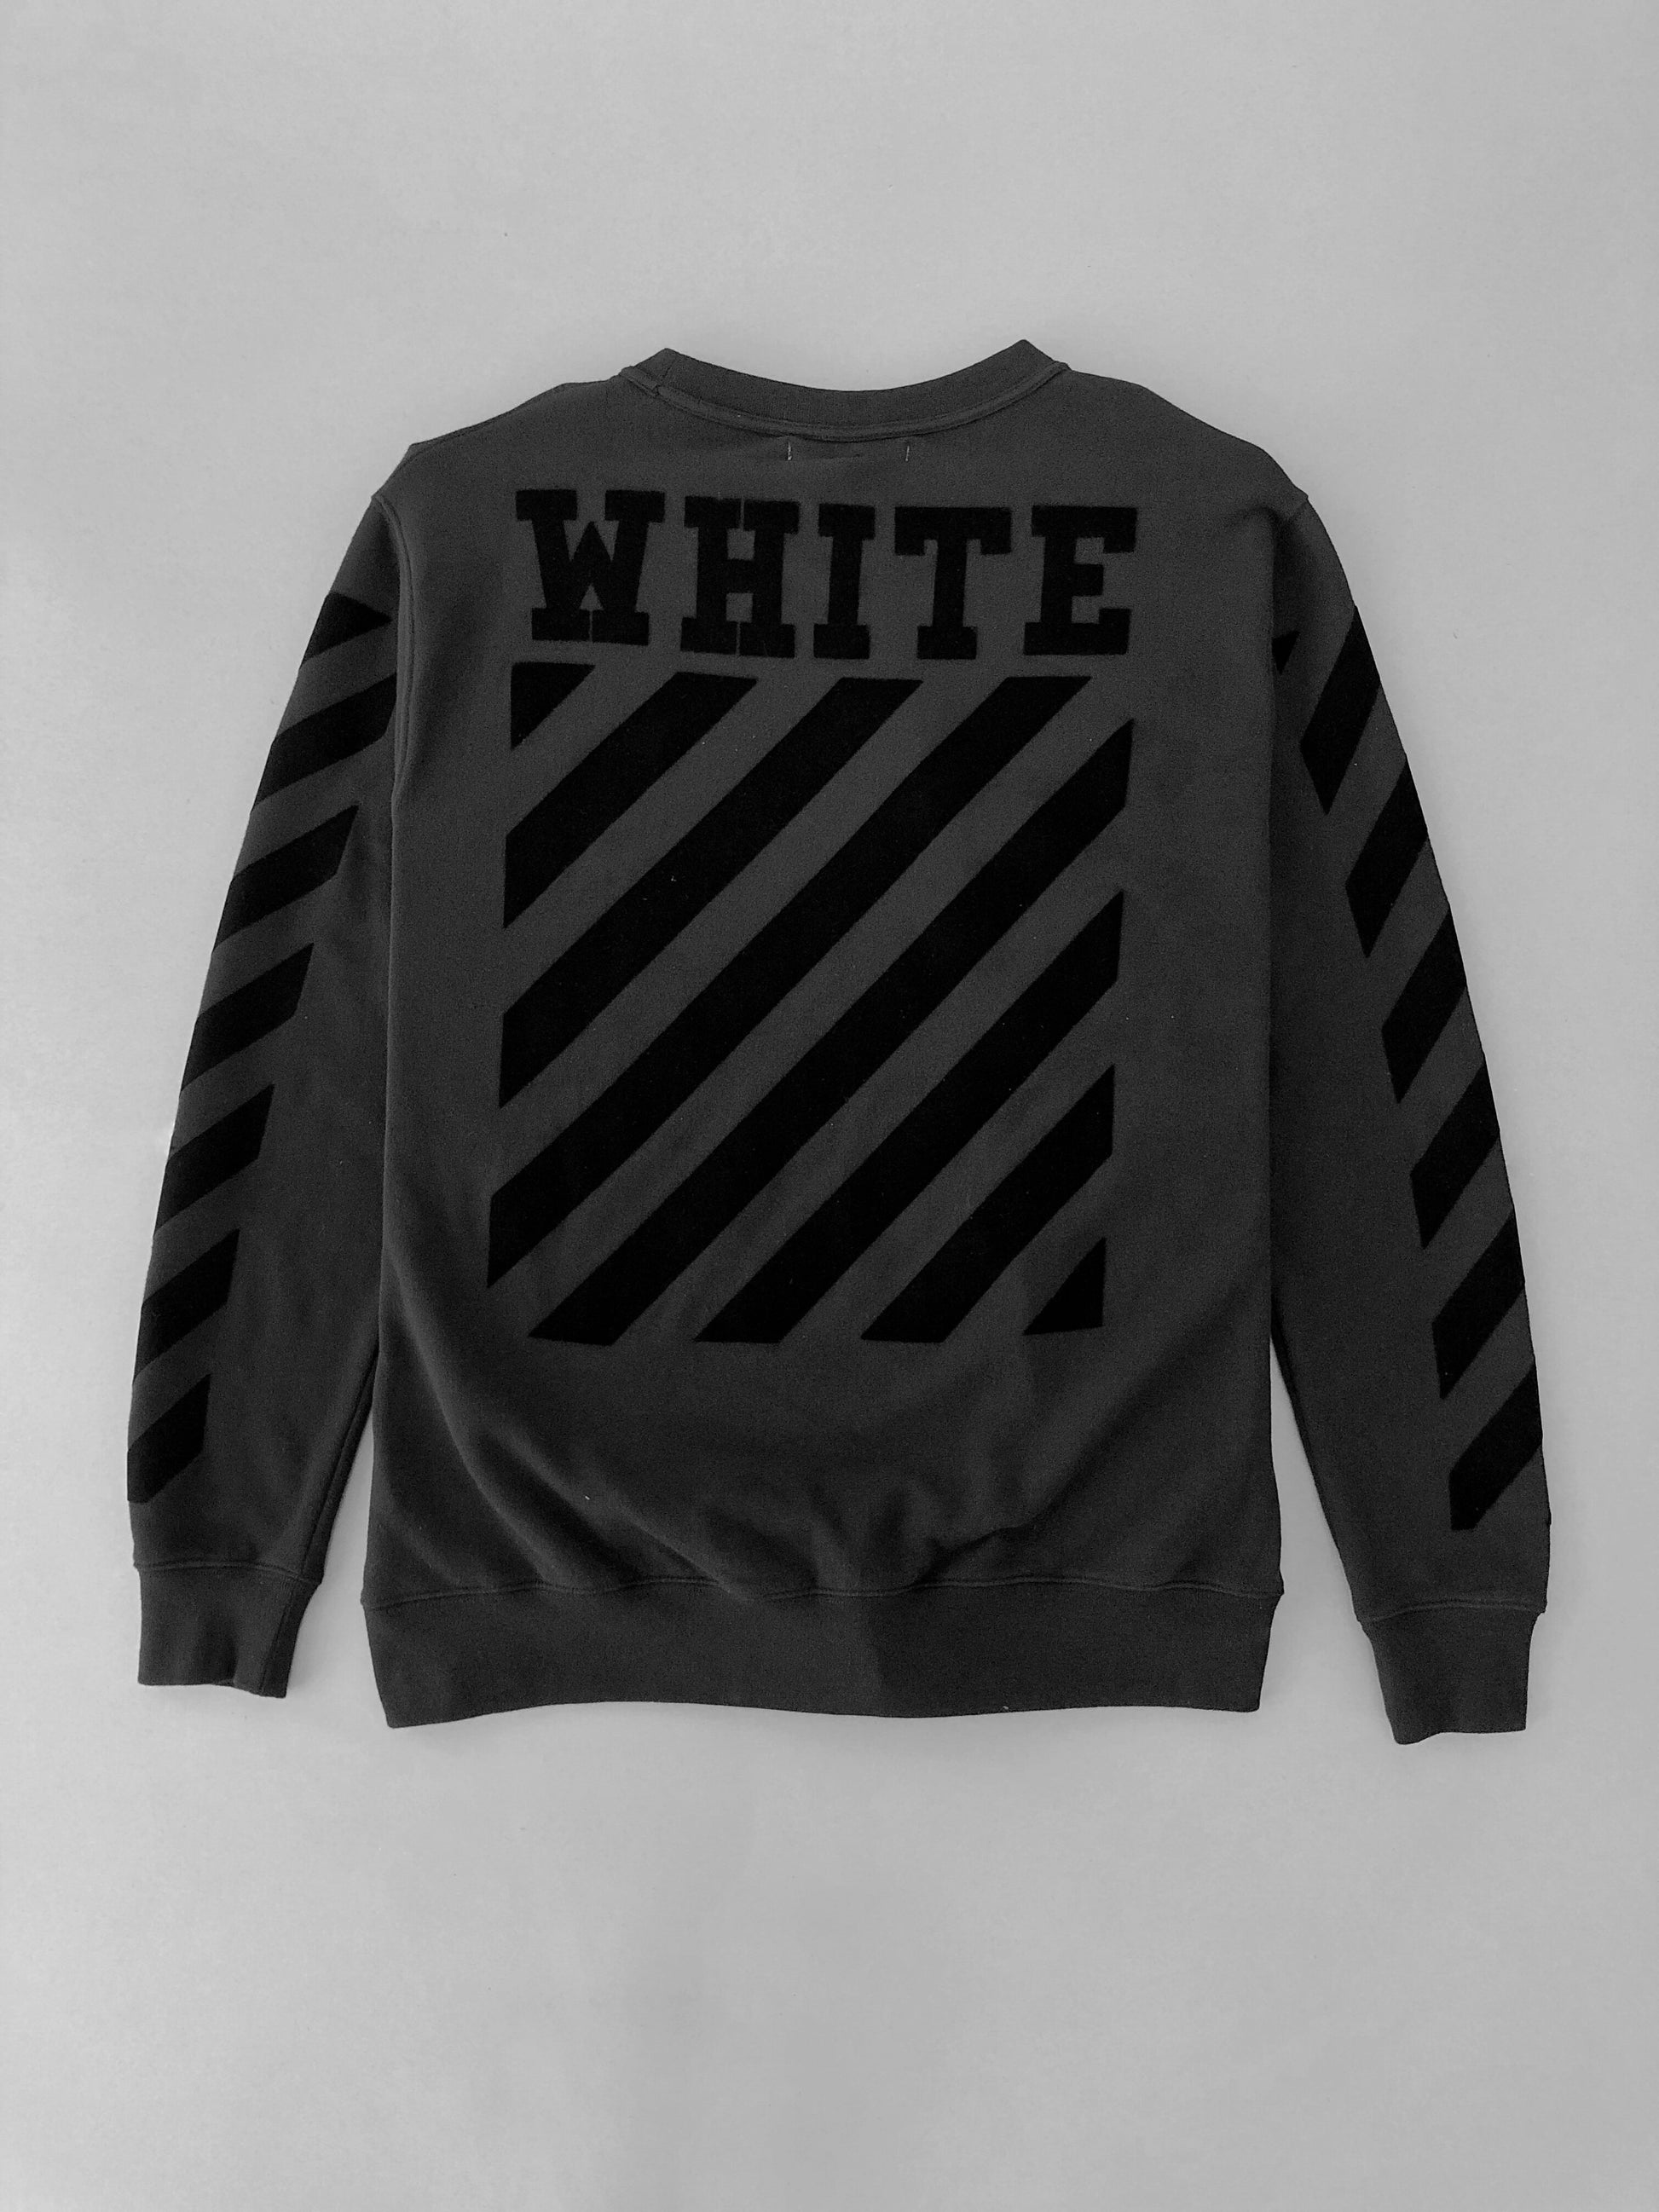 Off White Tone on Tone Crewneck SS18 Collection